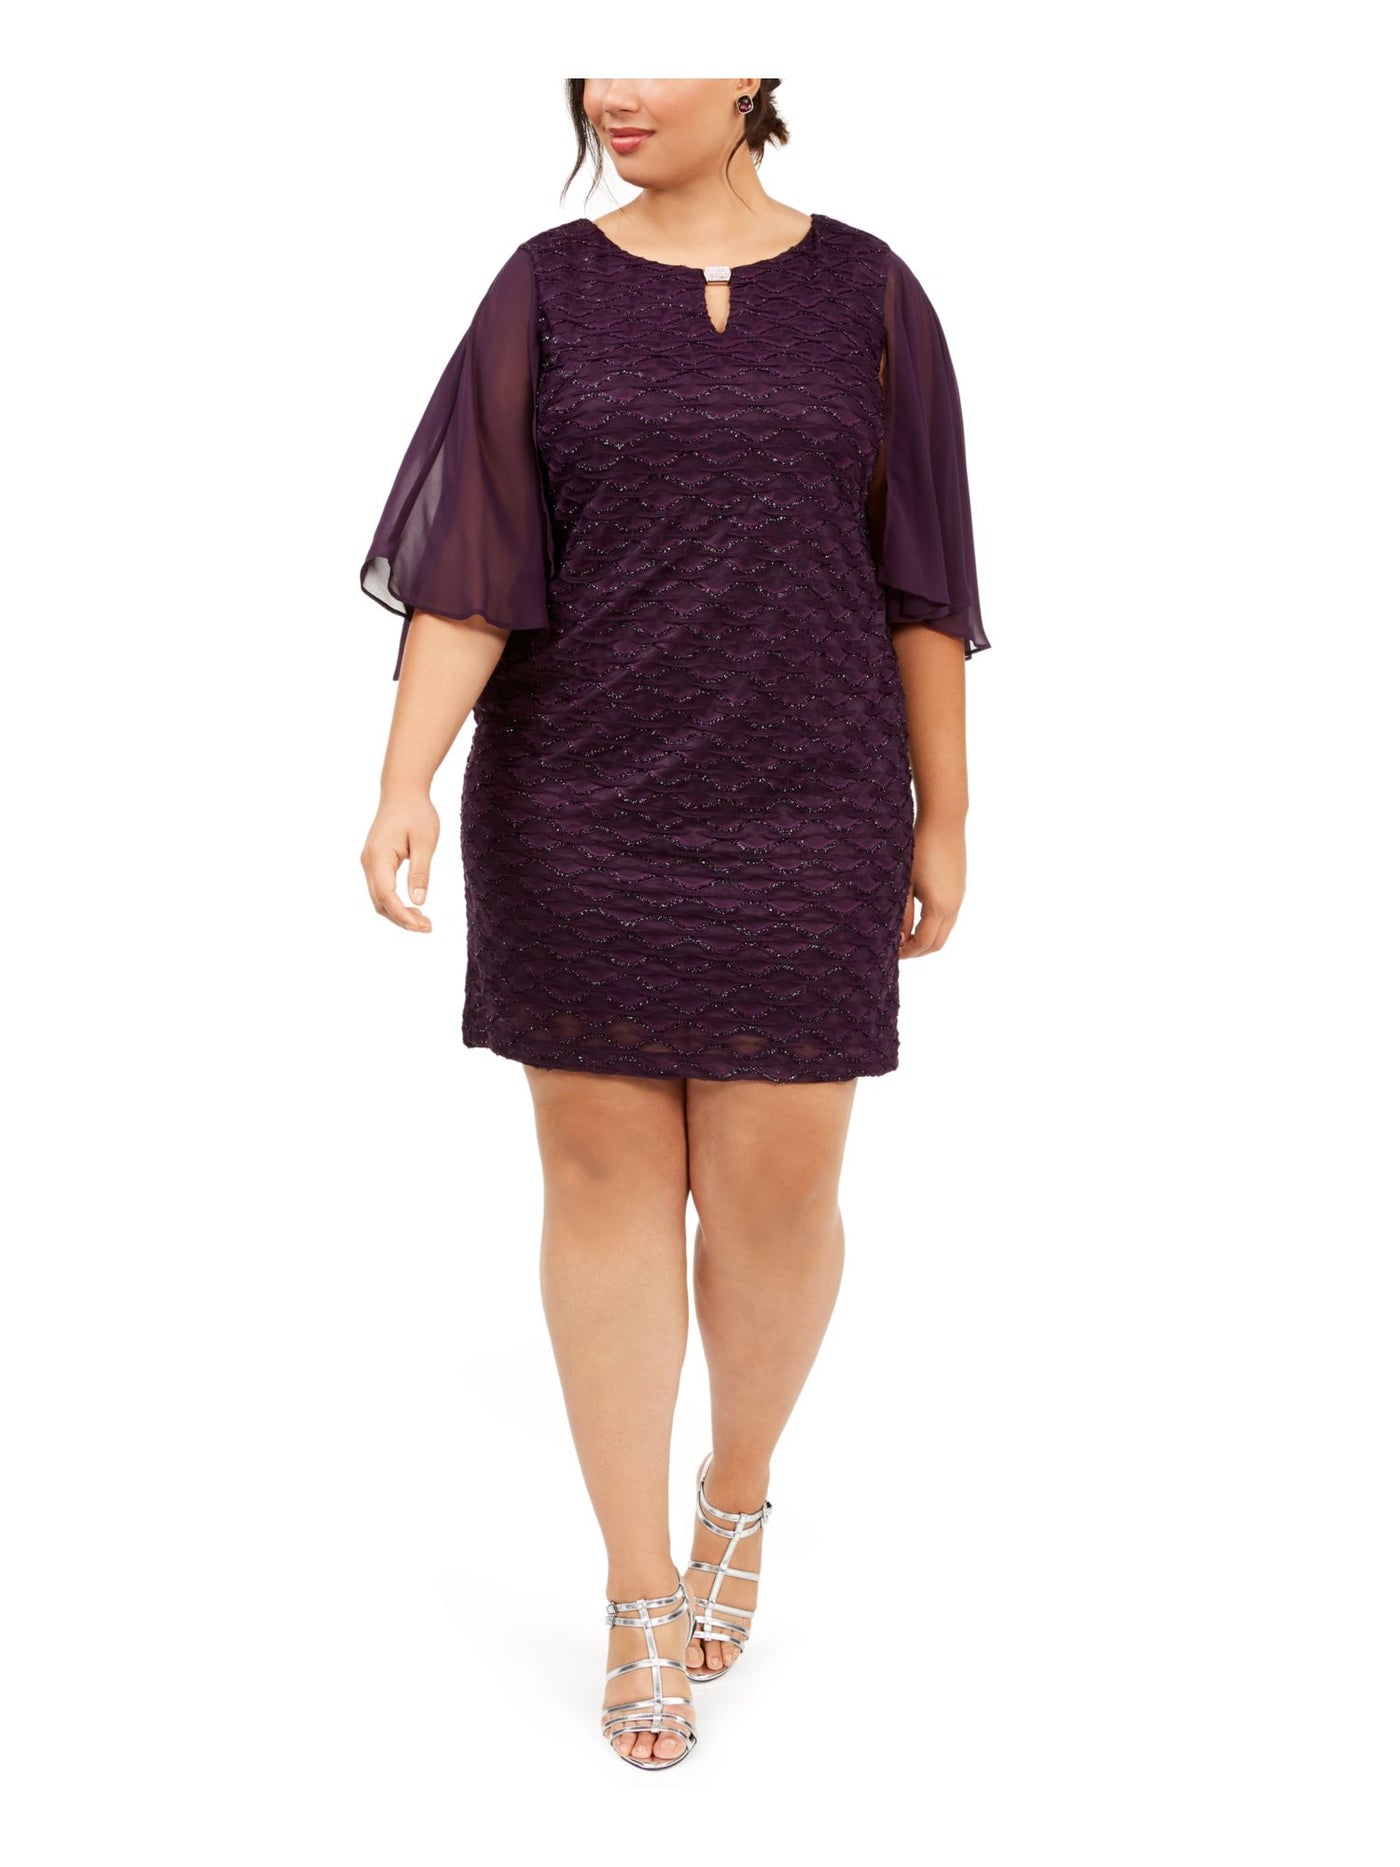 CONNECTED APPAREL Womens Purple Frayed Sheer Sleeves 3/4 Sleeve Keyhole Above The Knee Cocktail Sheath Dress Plus 18W